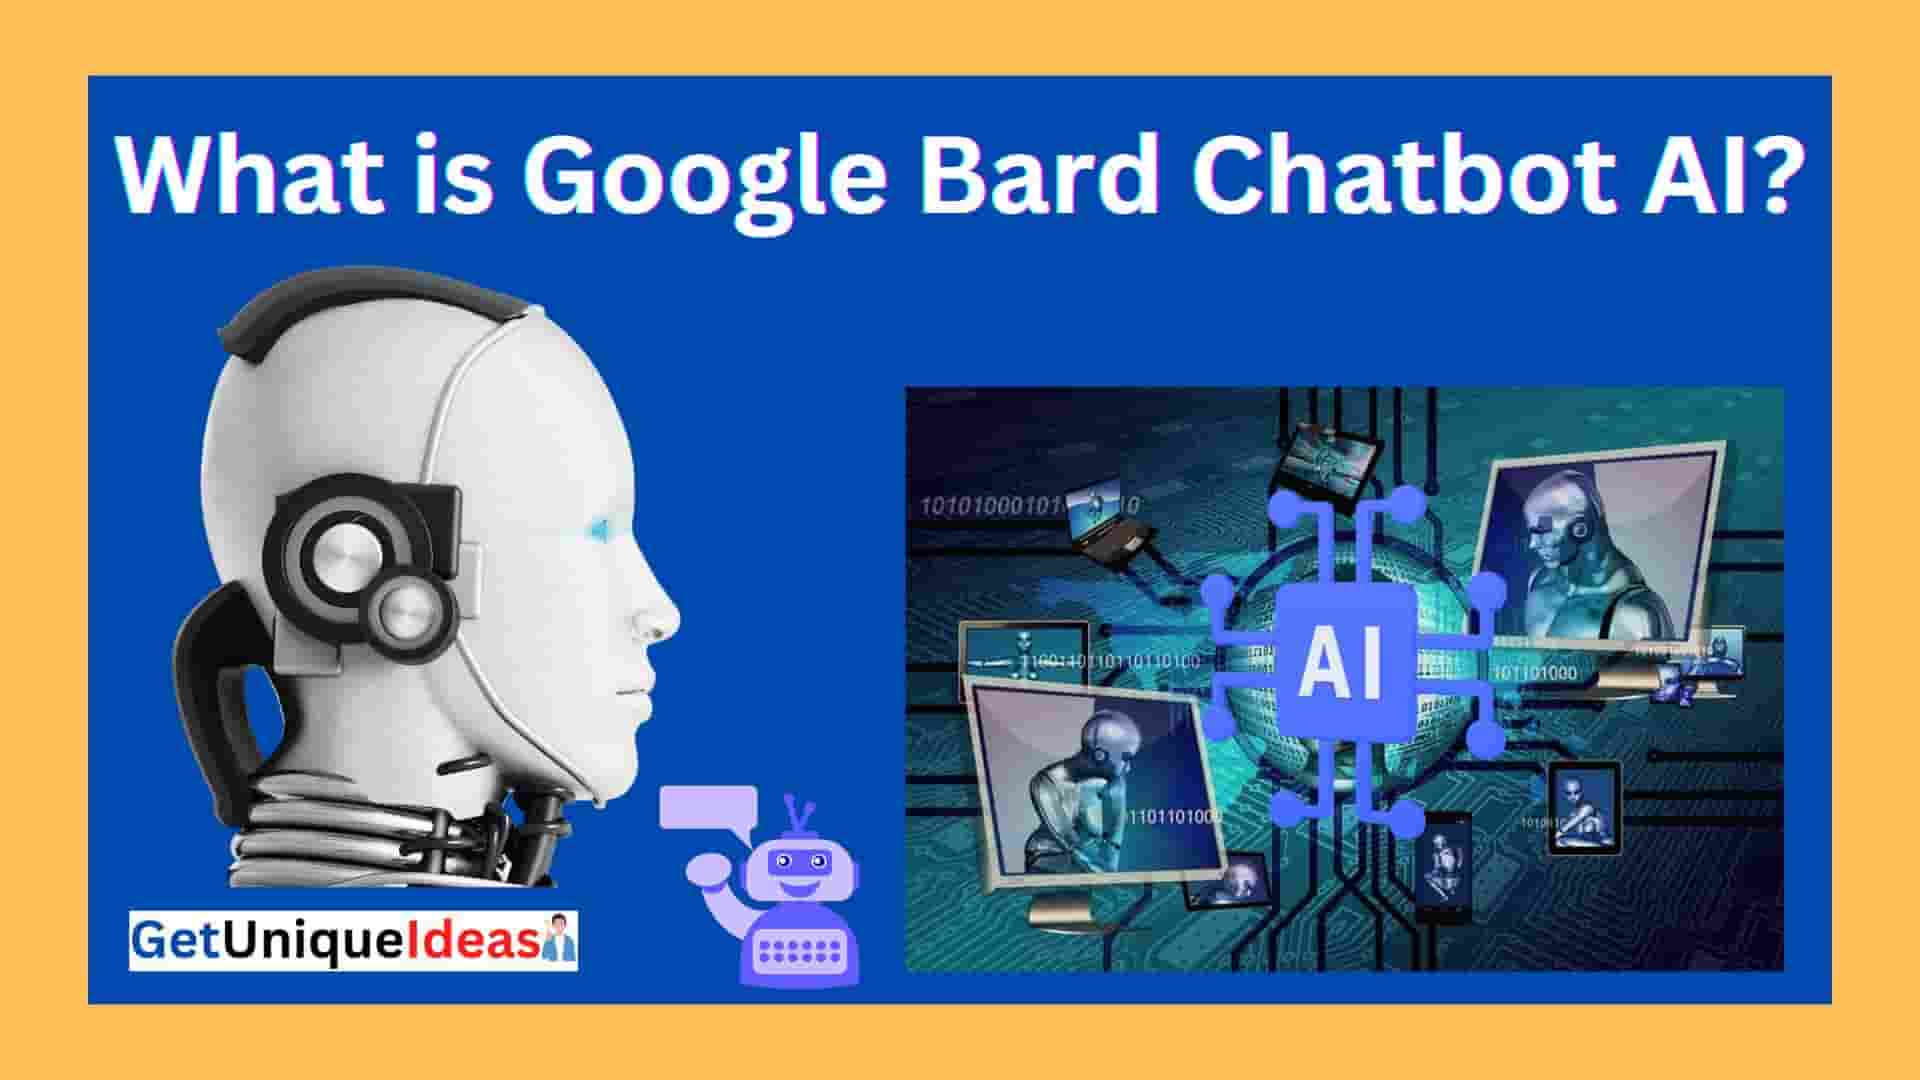 What is Google Bard Chatbot AI